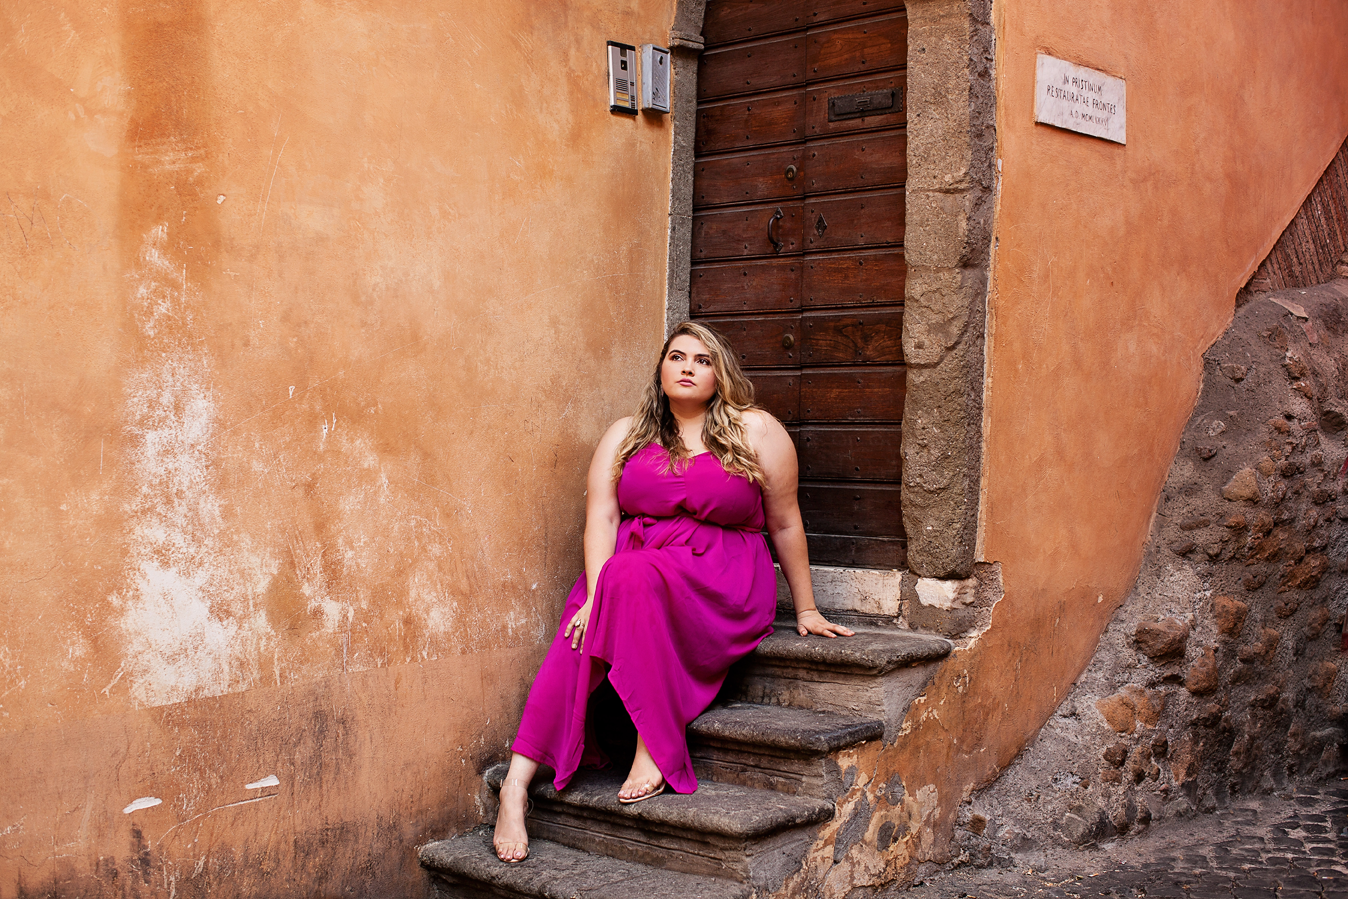 solo photoshoot, rome photographer, rome vacation photographer, trastevere photoshoot, trastevere photo shoot, solo travel rome, rome activities, things to do in rome, solo travel rome, solo photo shoot rome, tricia anne photography